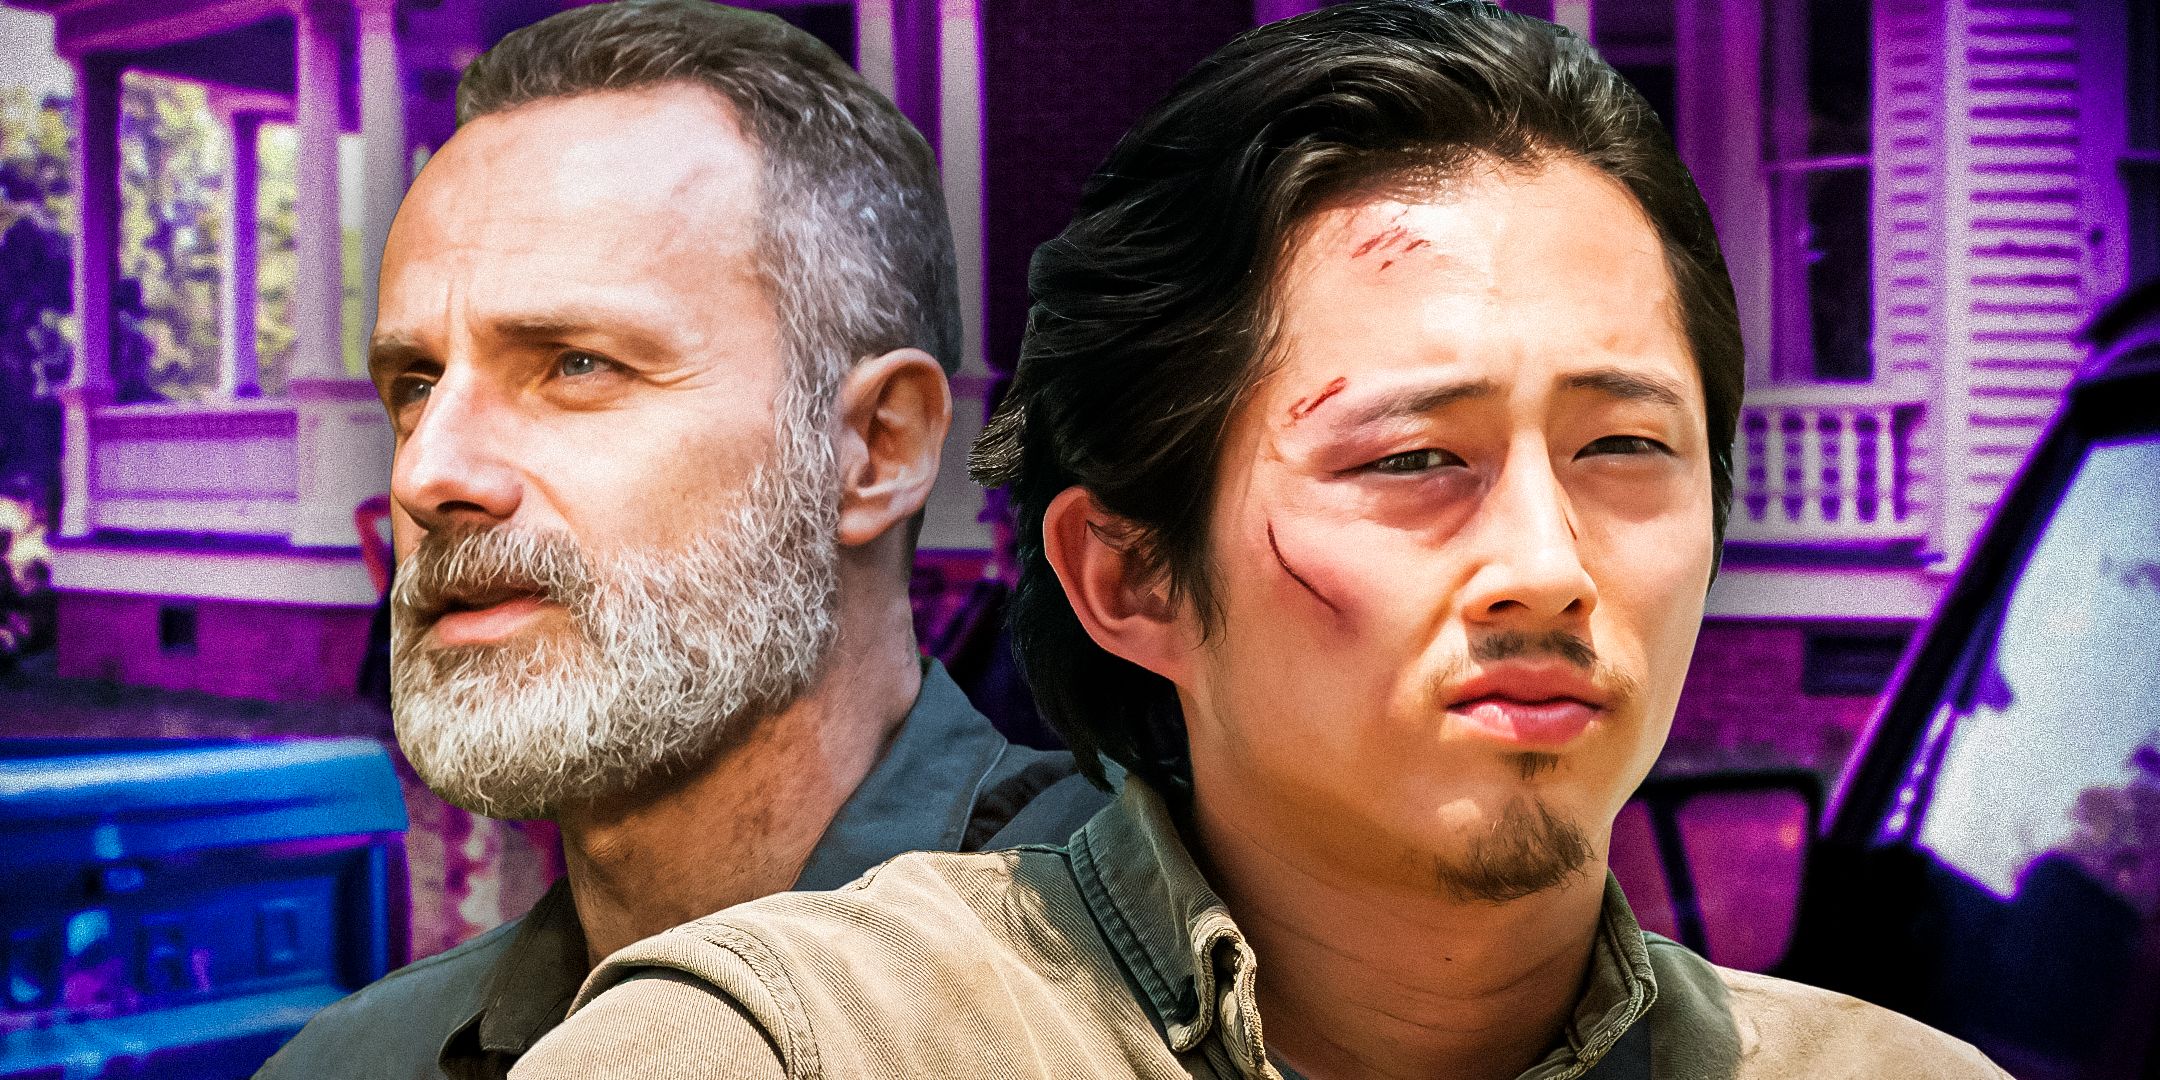 Glenn and Rick Grimes from The Walking Dead in front of a purple house background